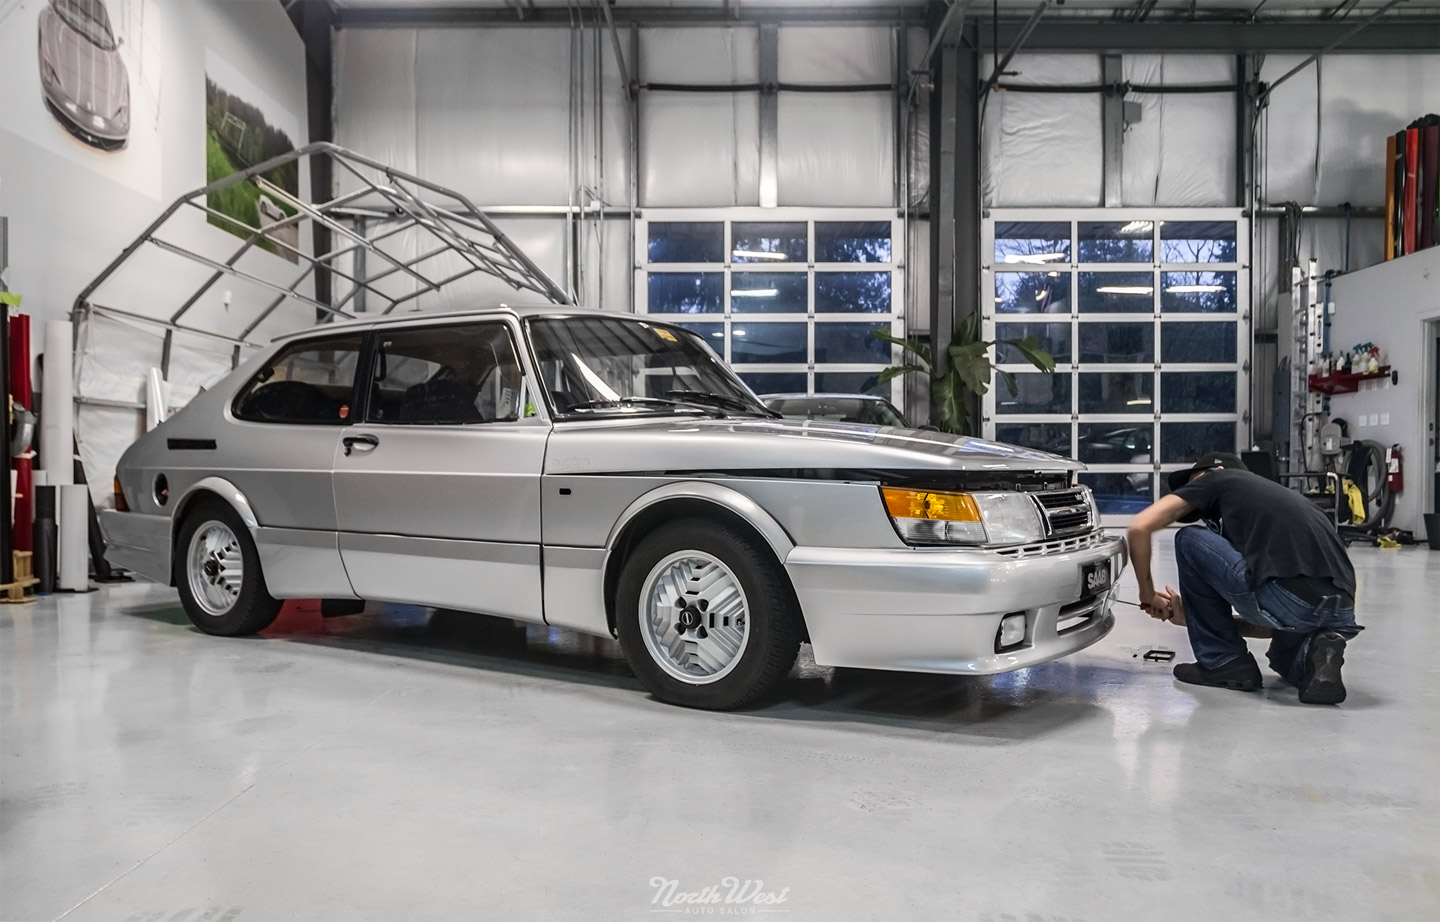 saab-900-turbo-spg-prototype-born-from-jets-vinyl-wrap-car-wrap-outside-nwas-disassembly